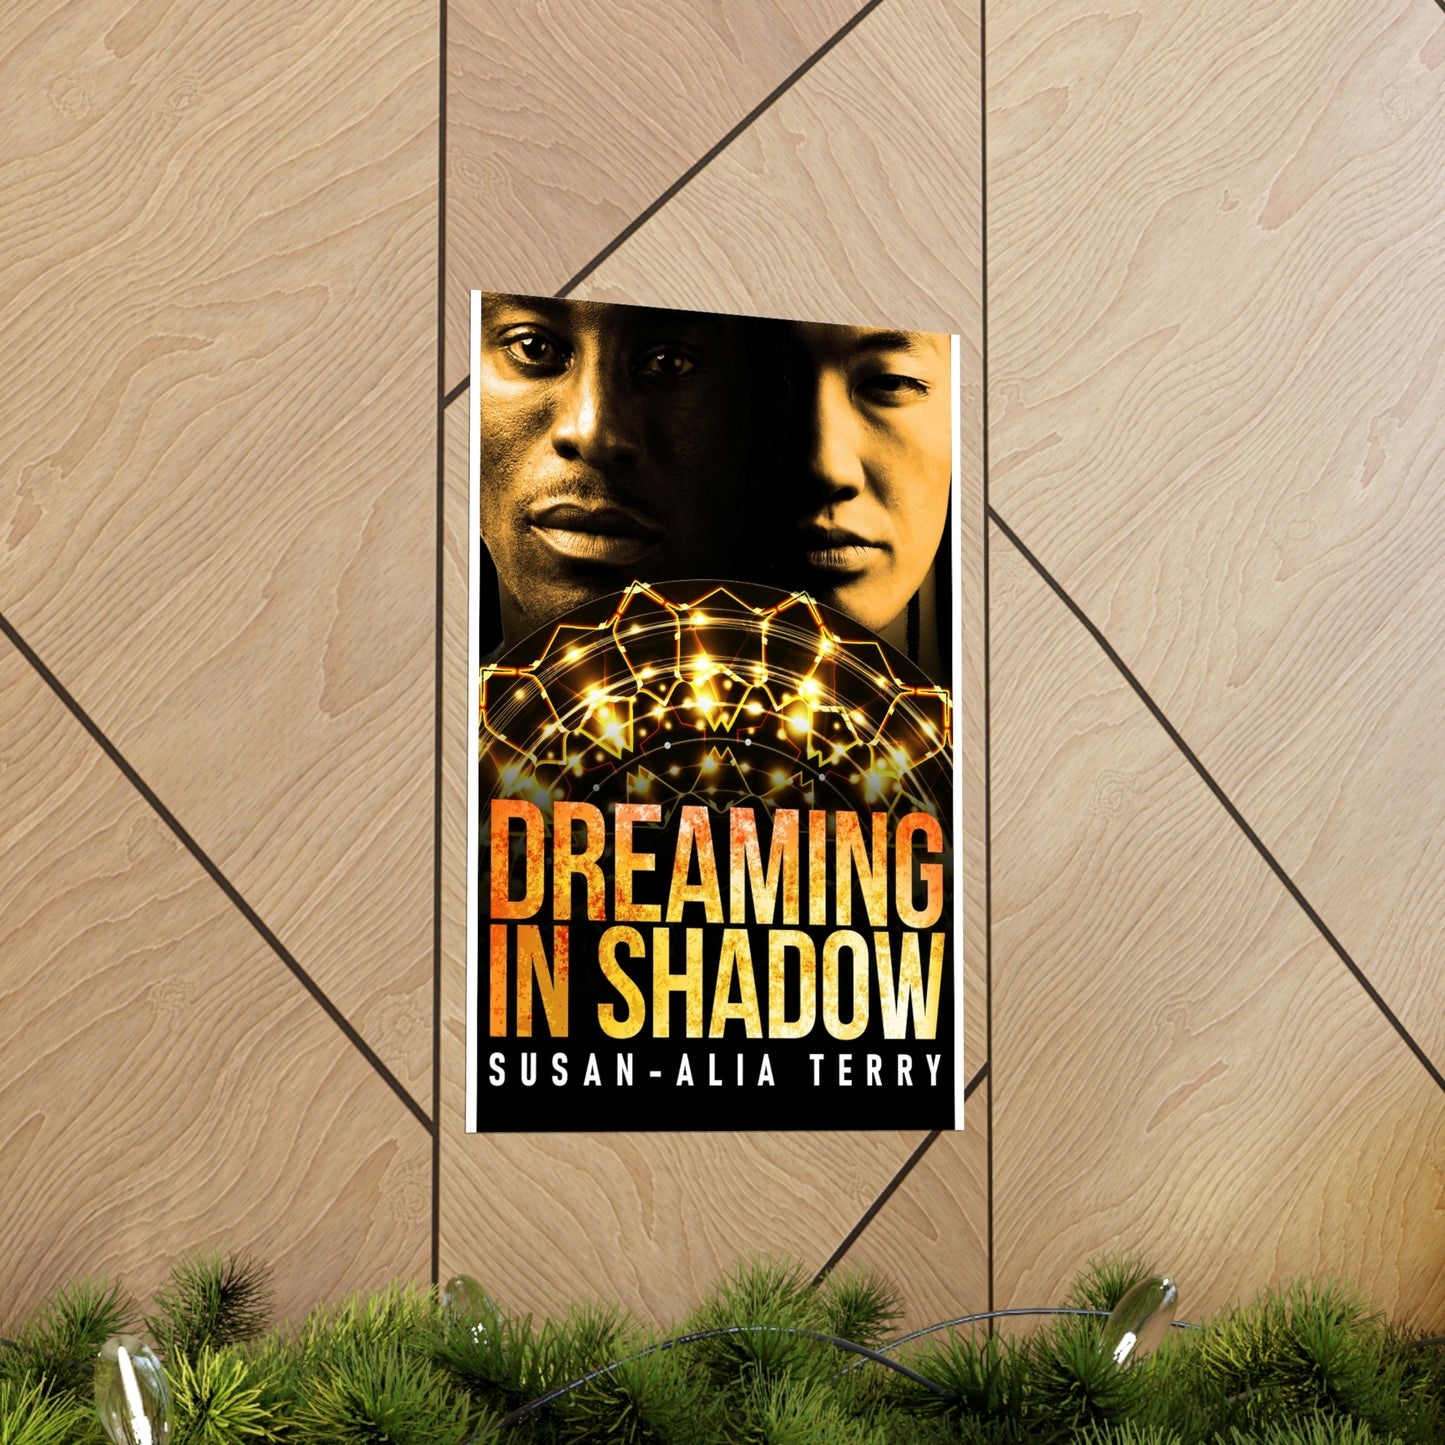 Dreaming In Shadow - Matte Poster